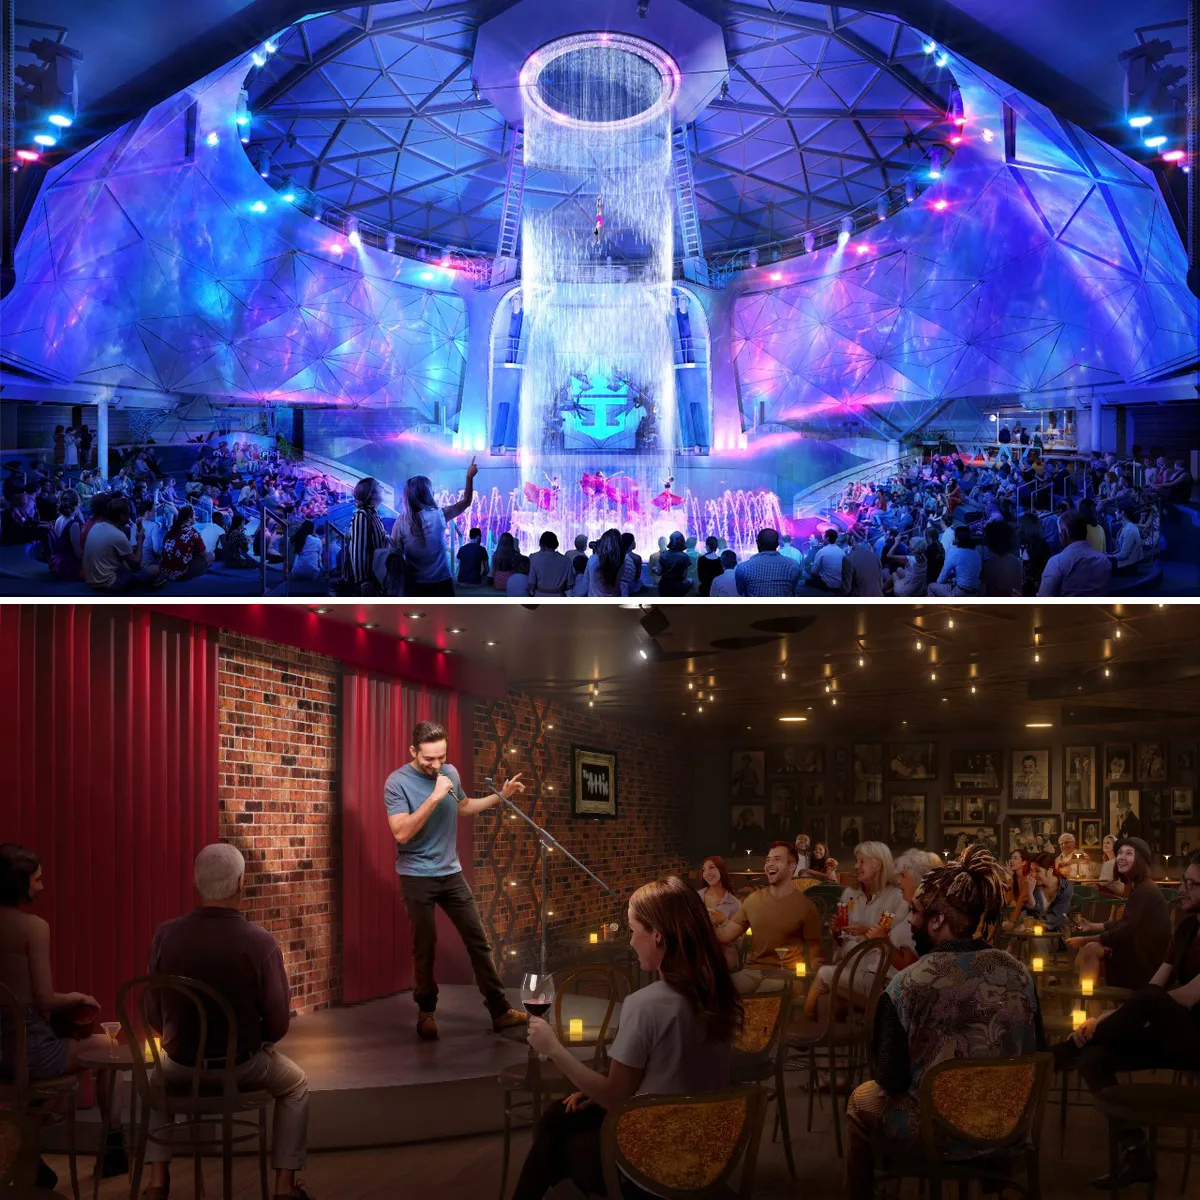 entertainment options aboard Royal Caribbean's newest cruise ship